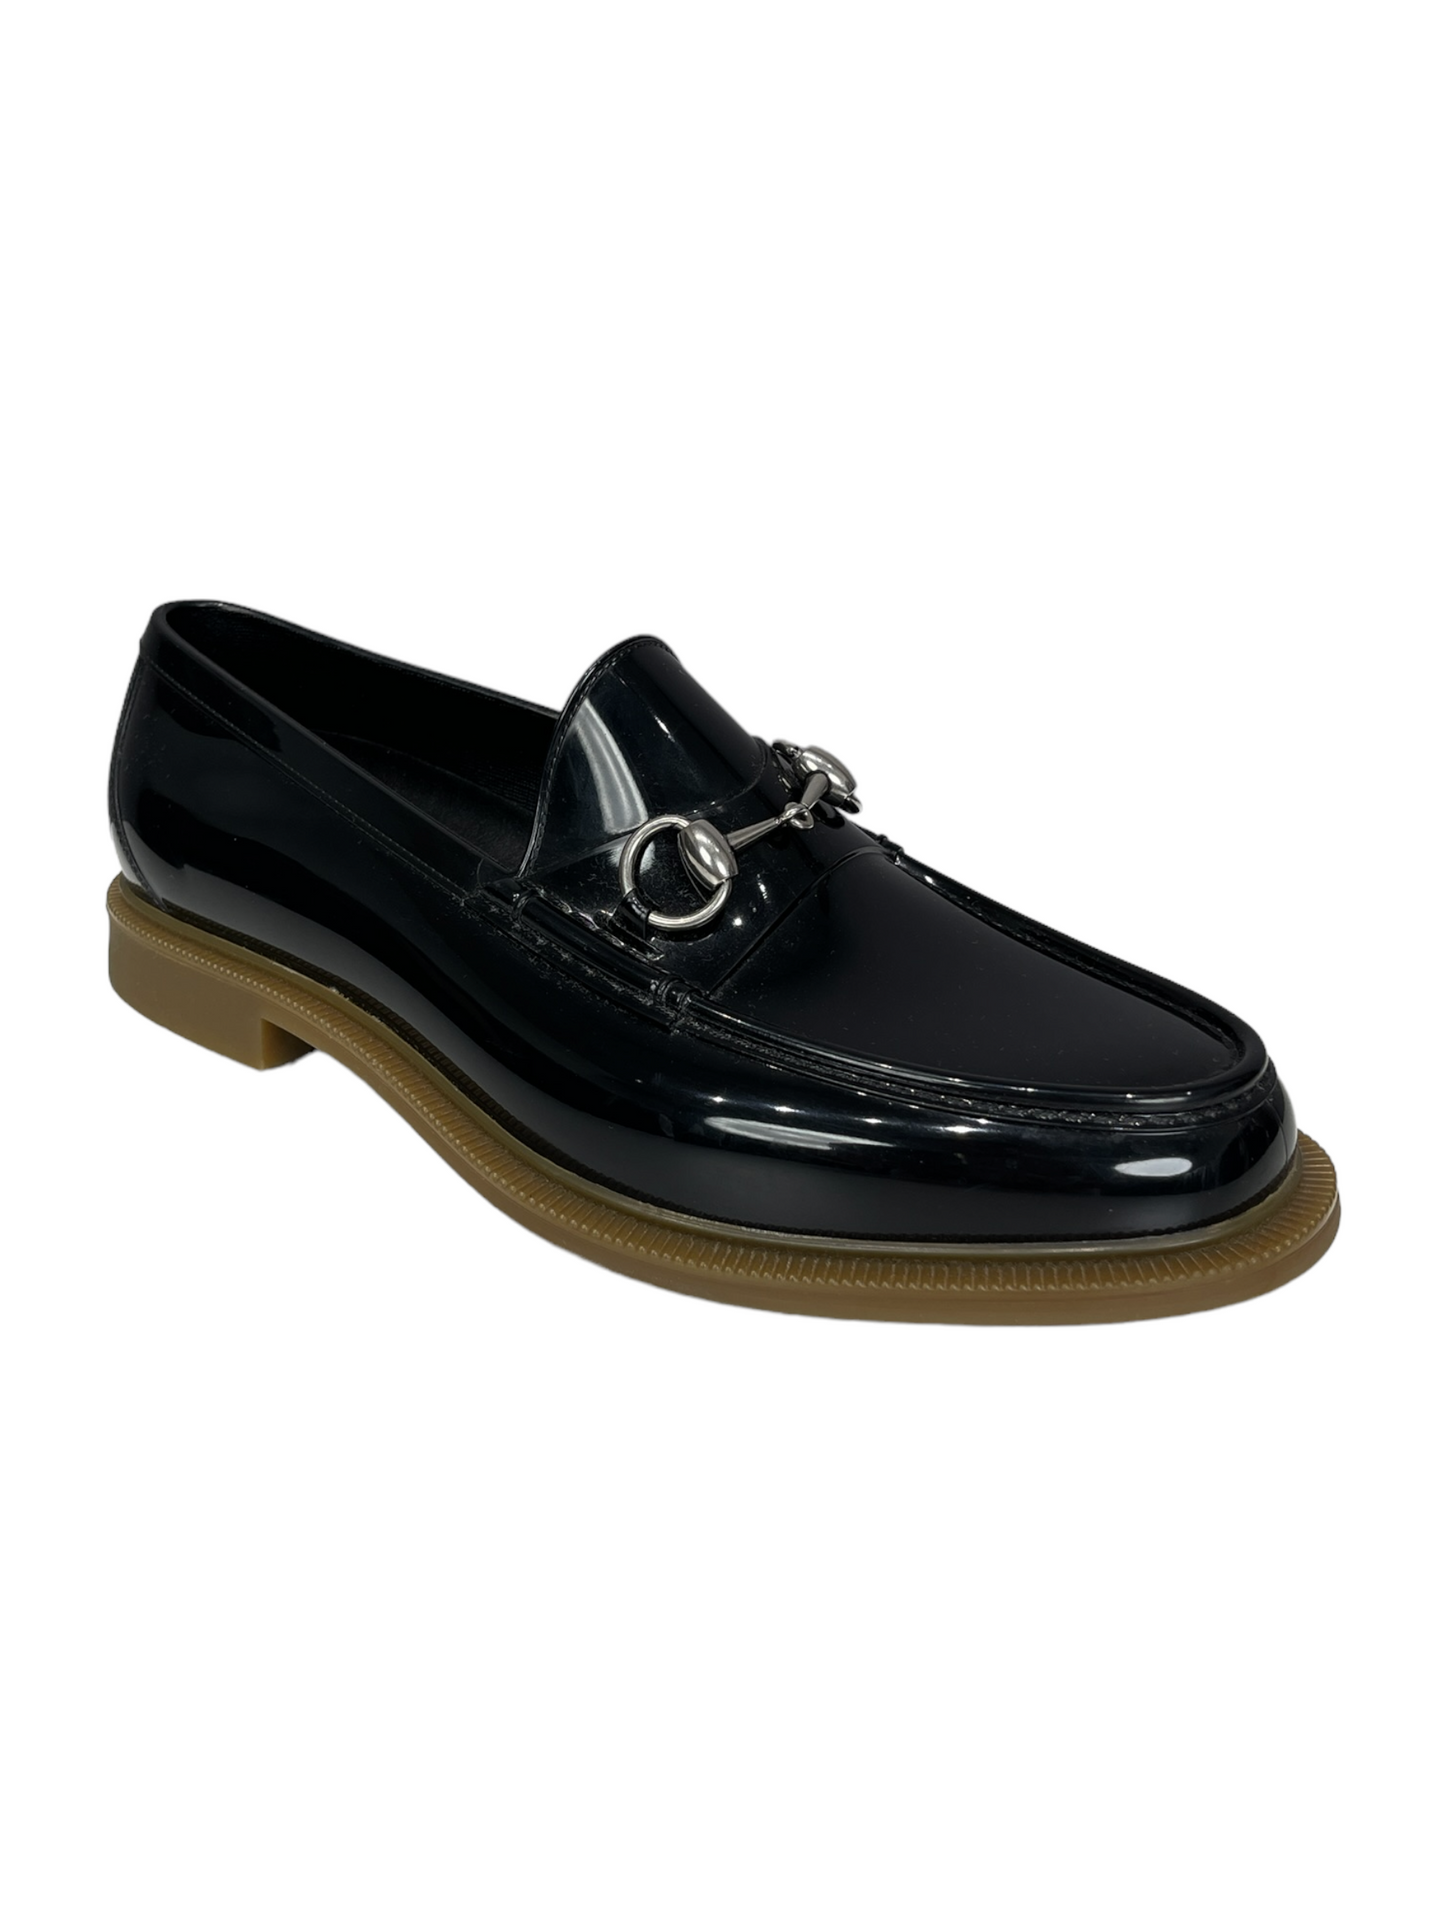 Gucci Rubber Horsebit Moccasin Loafer - Genuine Design Luxury Consignment for Men. New & Pre-Owned Clothing, Shoes, & Accessories. Calgary, Canada